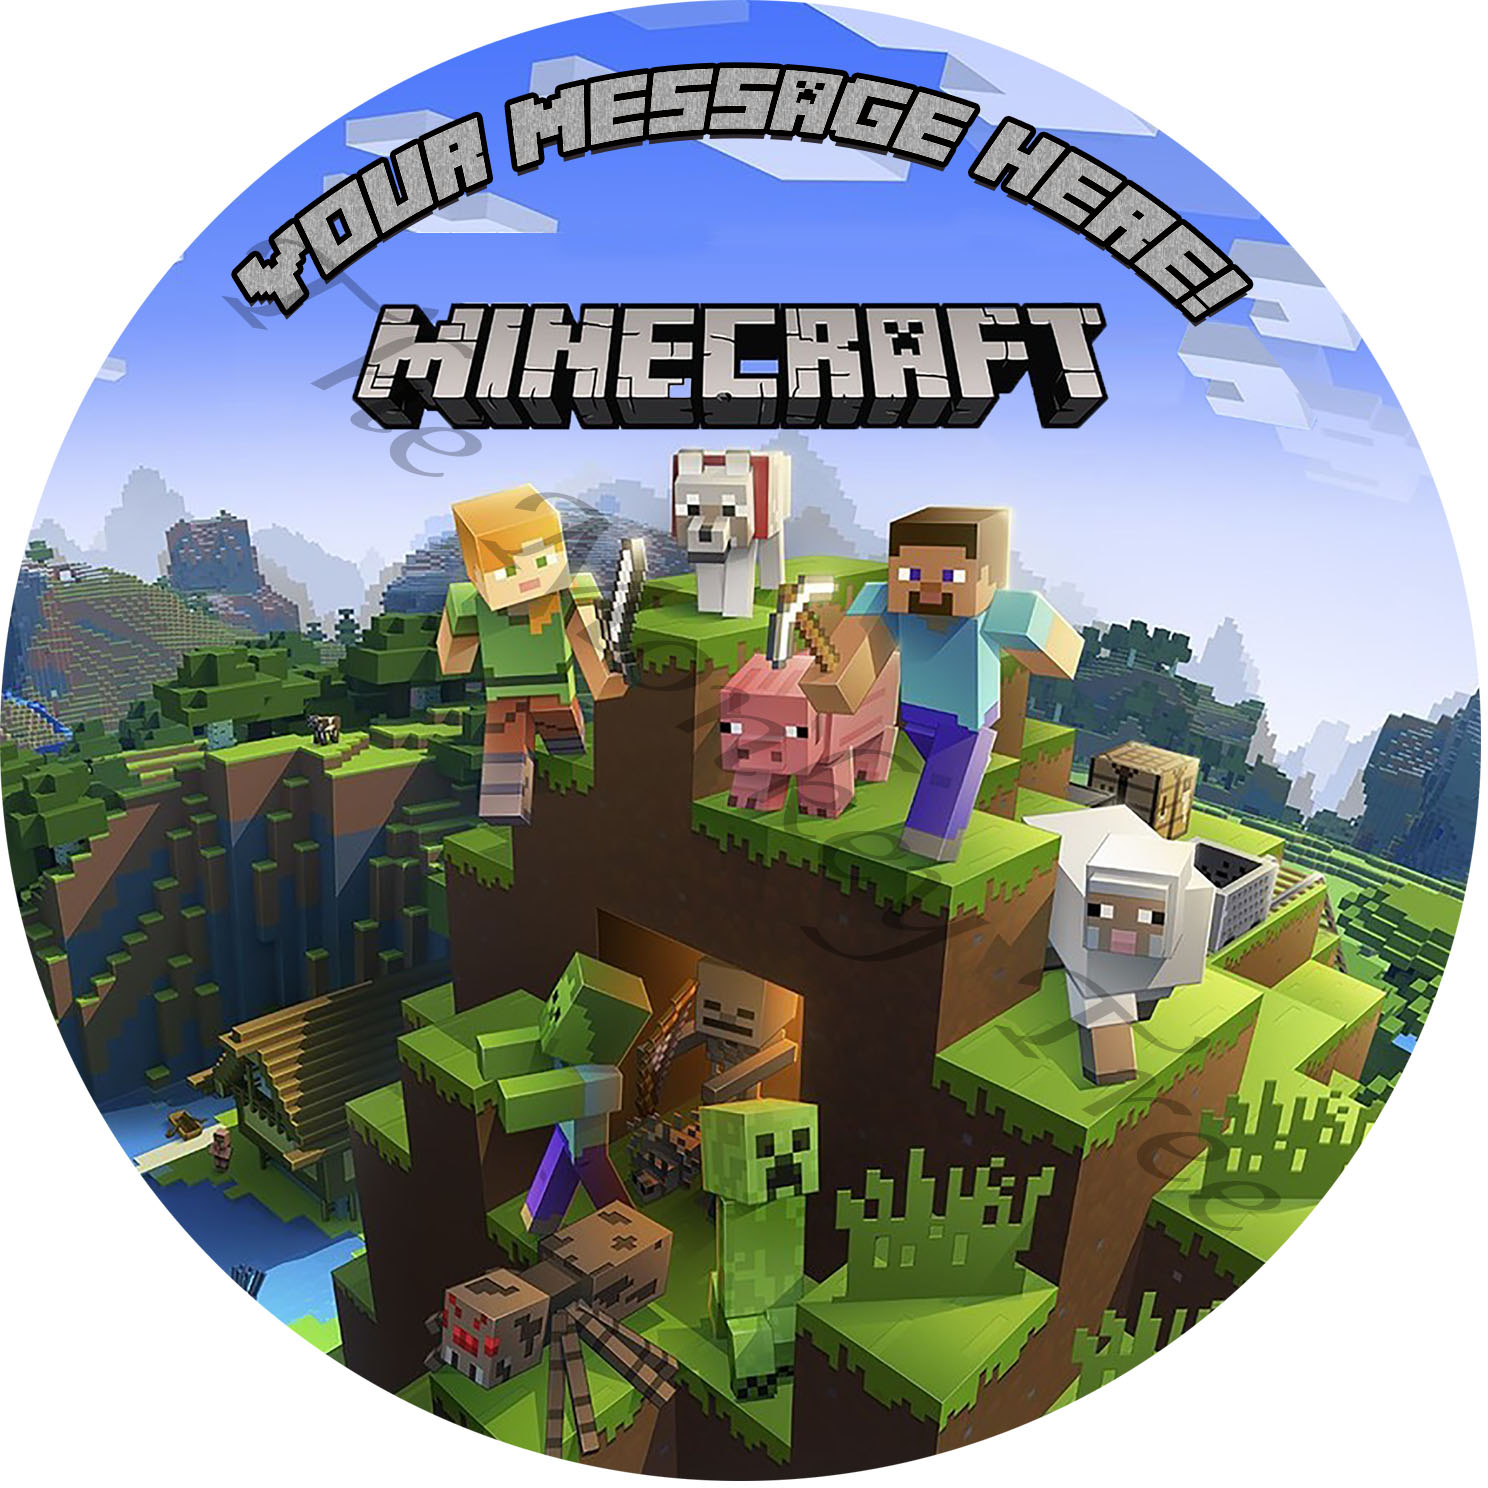 Minecraft Round Edible Cake Topper Image 2 can be personalised! The